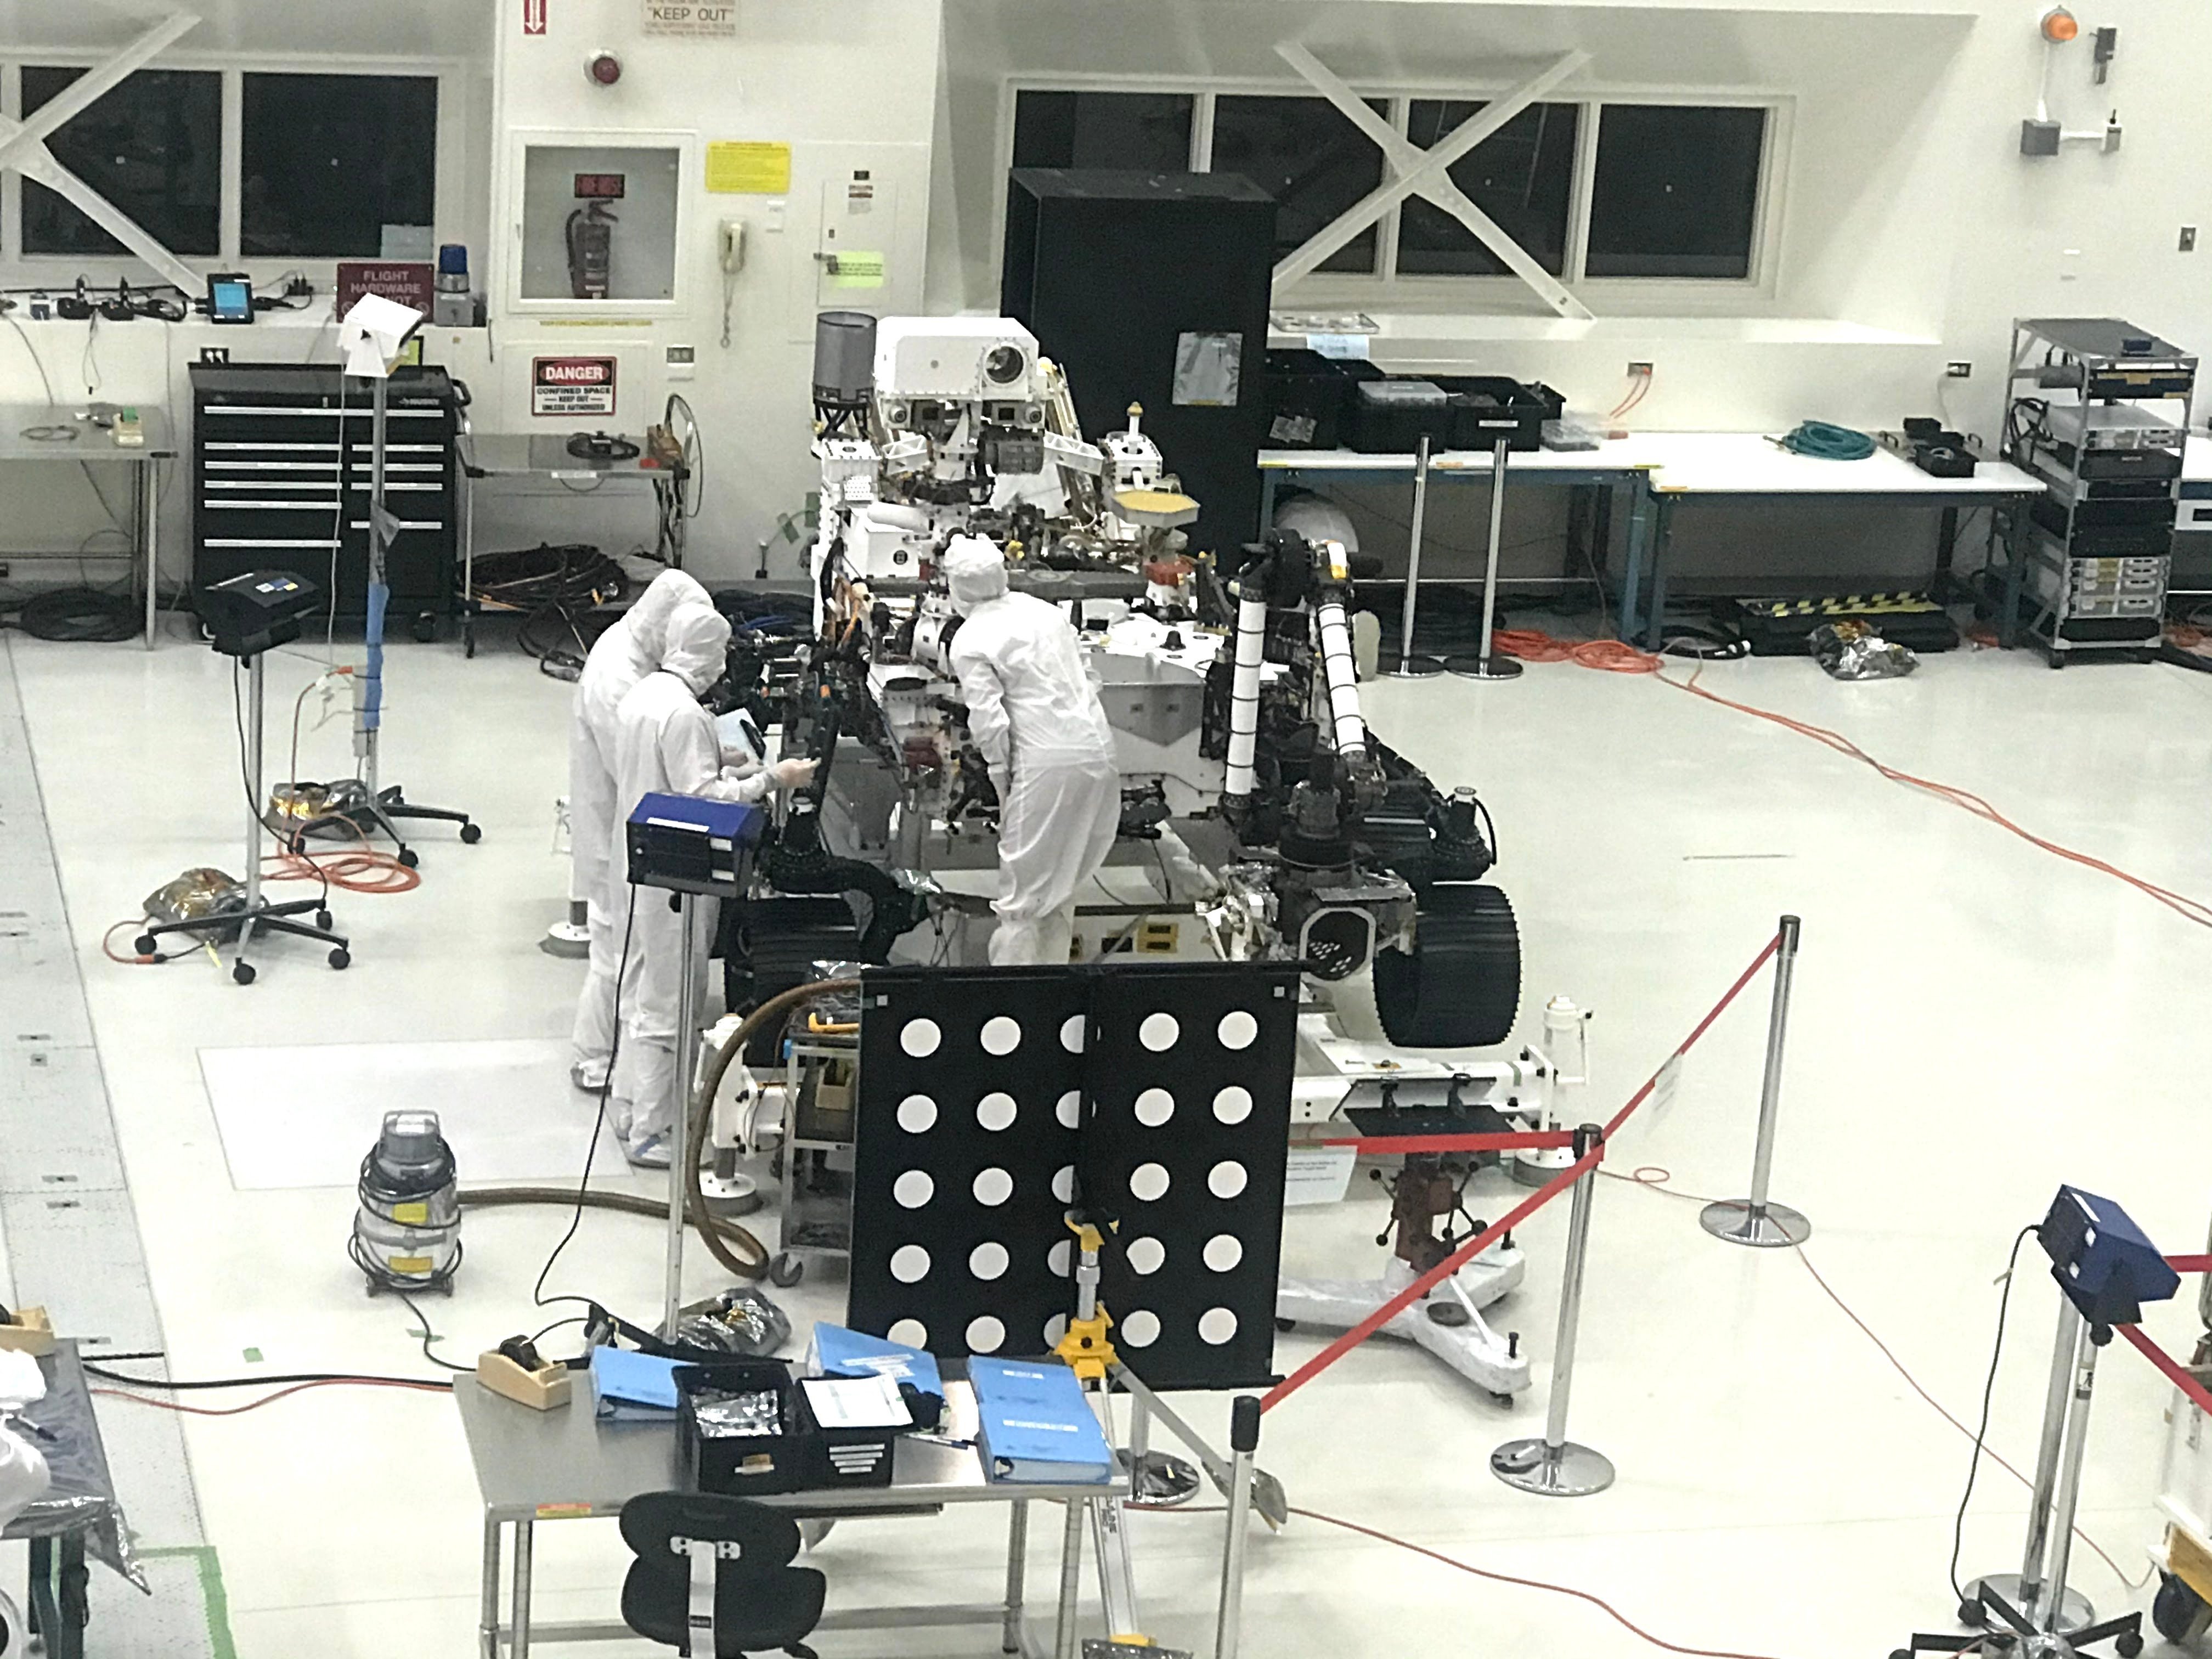 Mars rover being assembled at NASA's Jet Propulsion Lab (JPL) clean room.